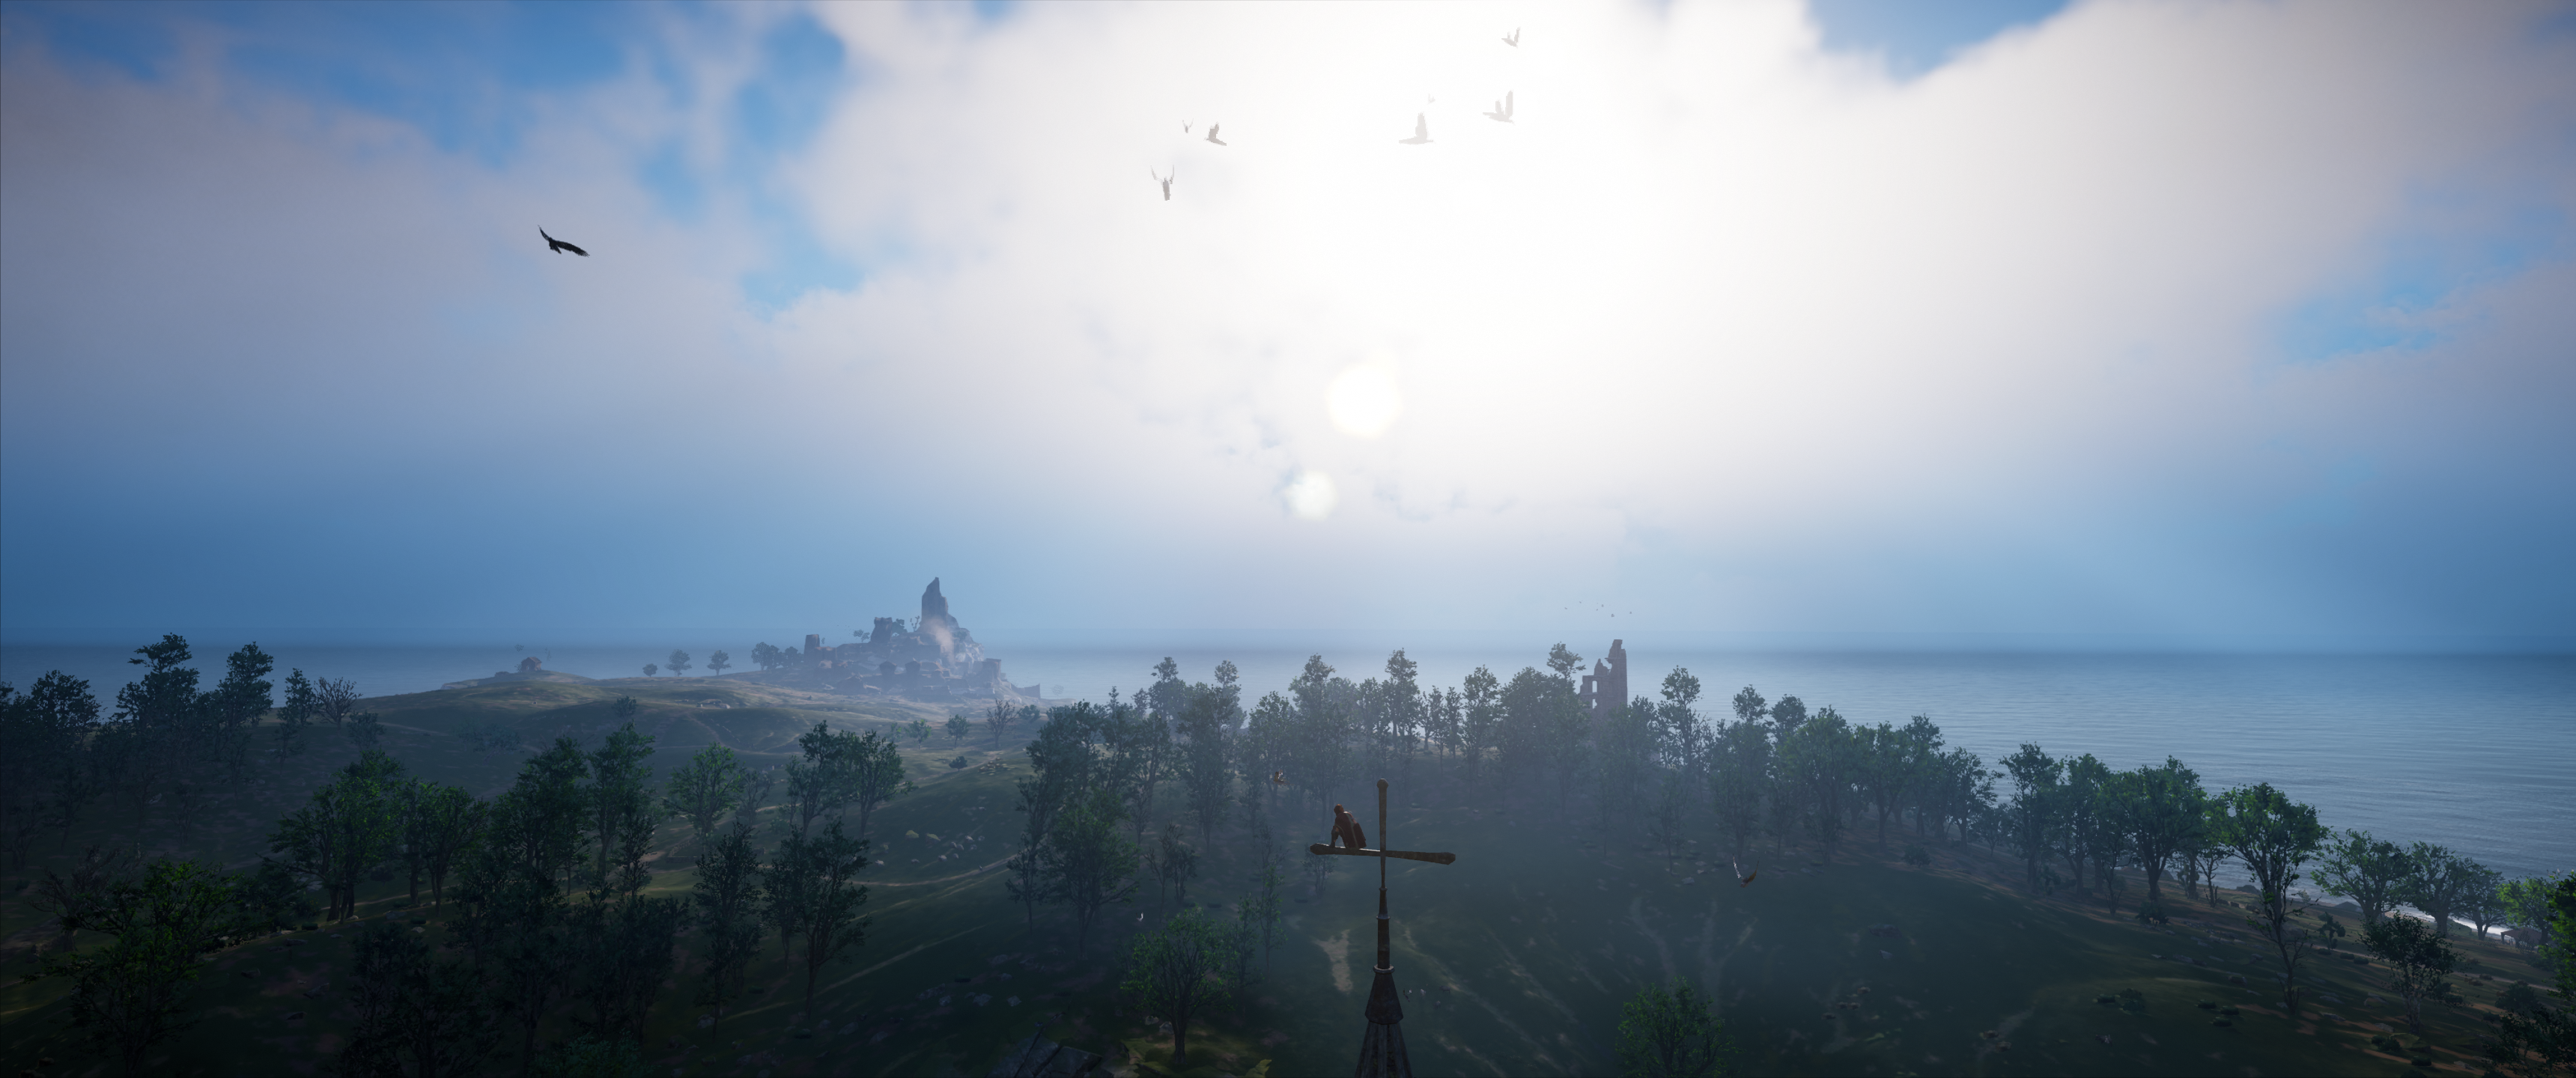 Assassins Creed Valhalla Landscape Sky Clouds Trees 3440x1440